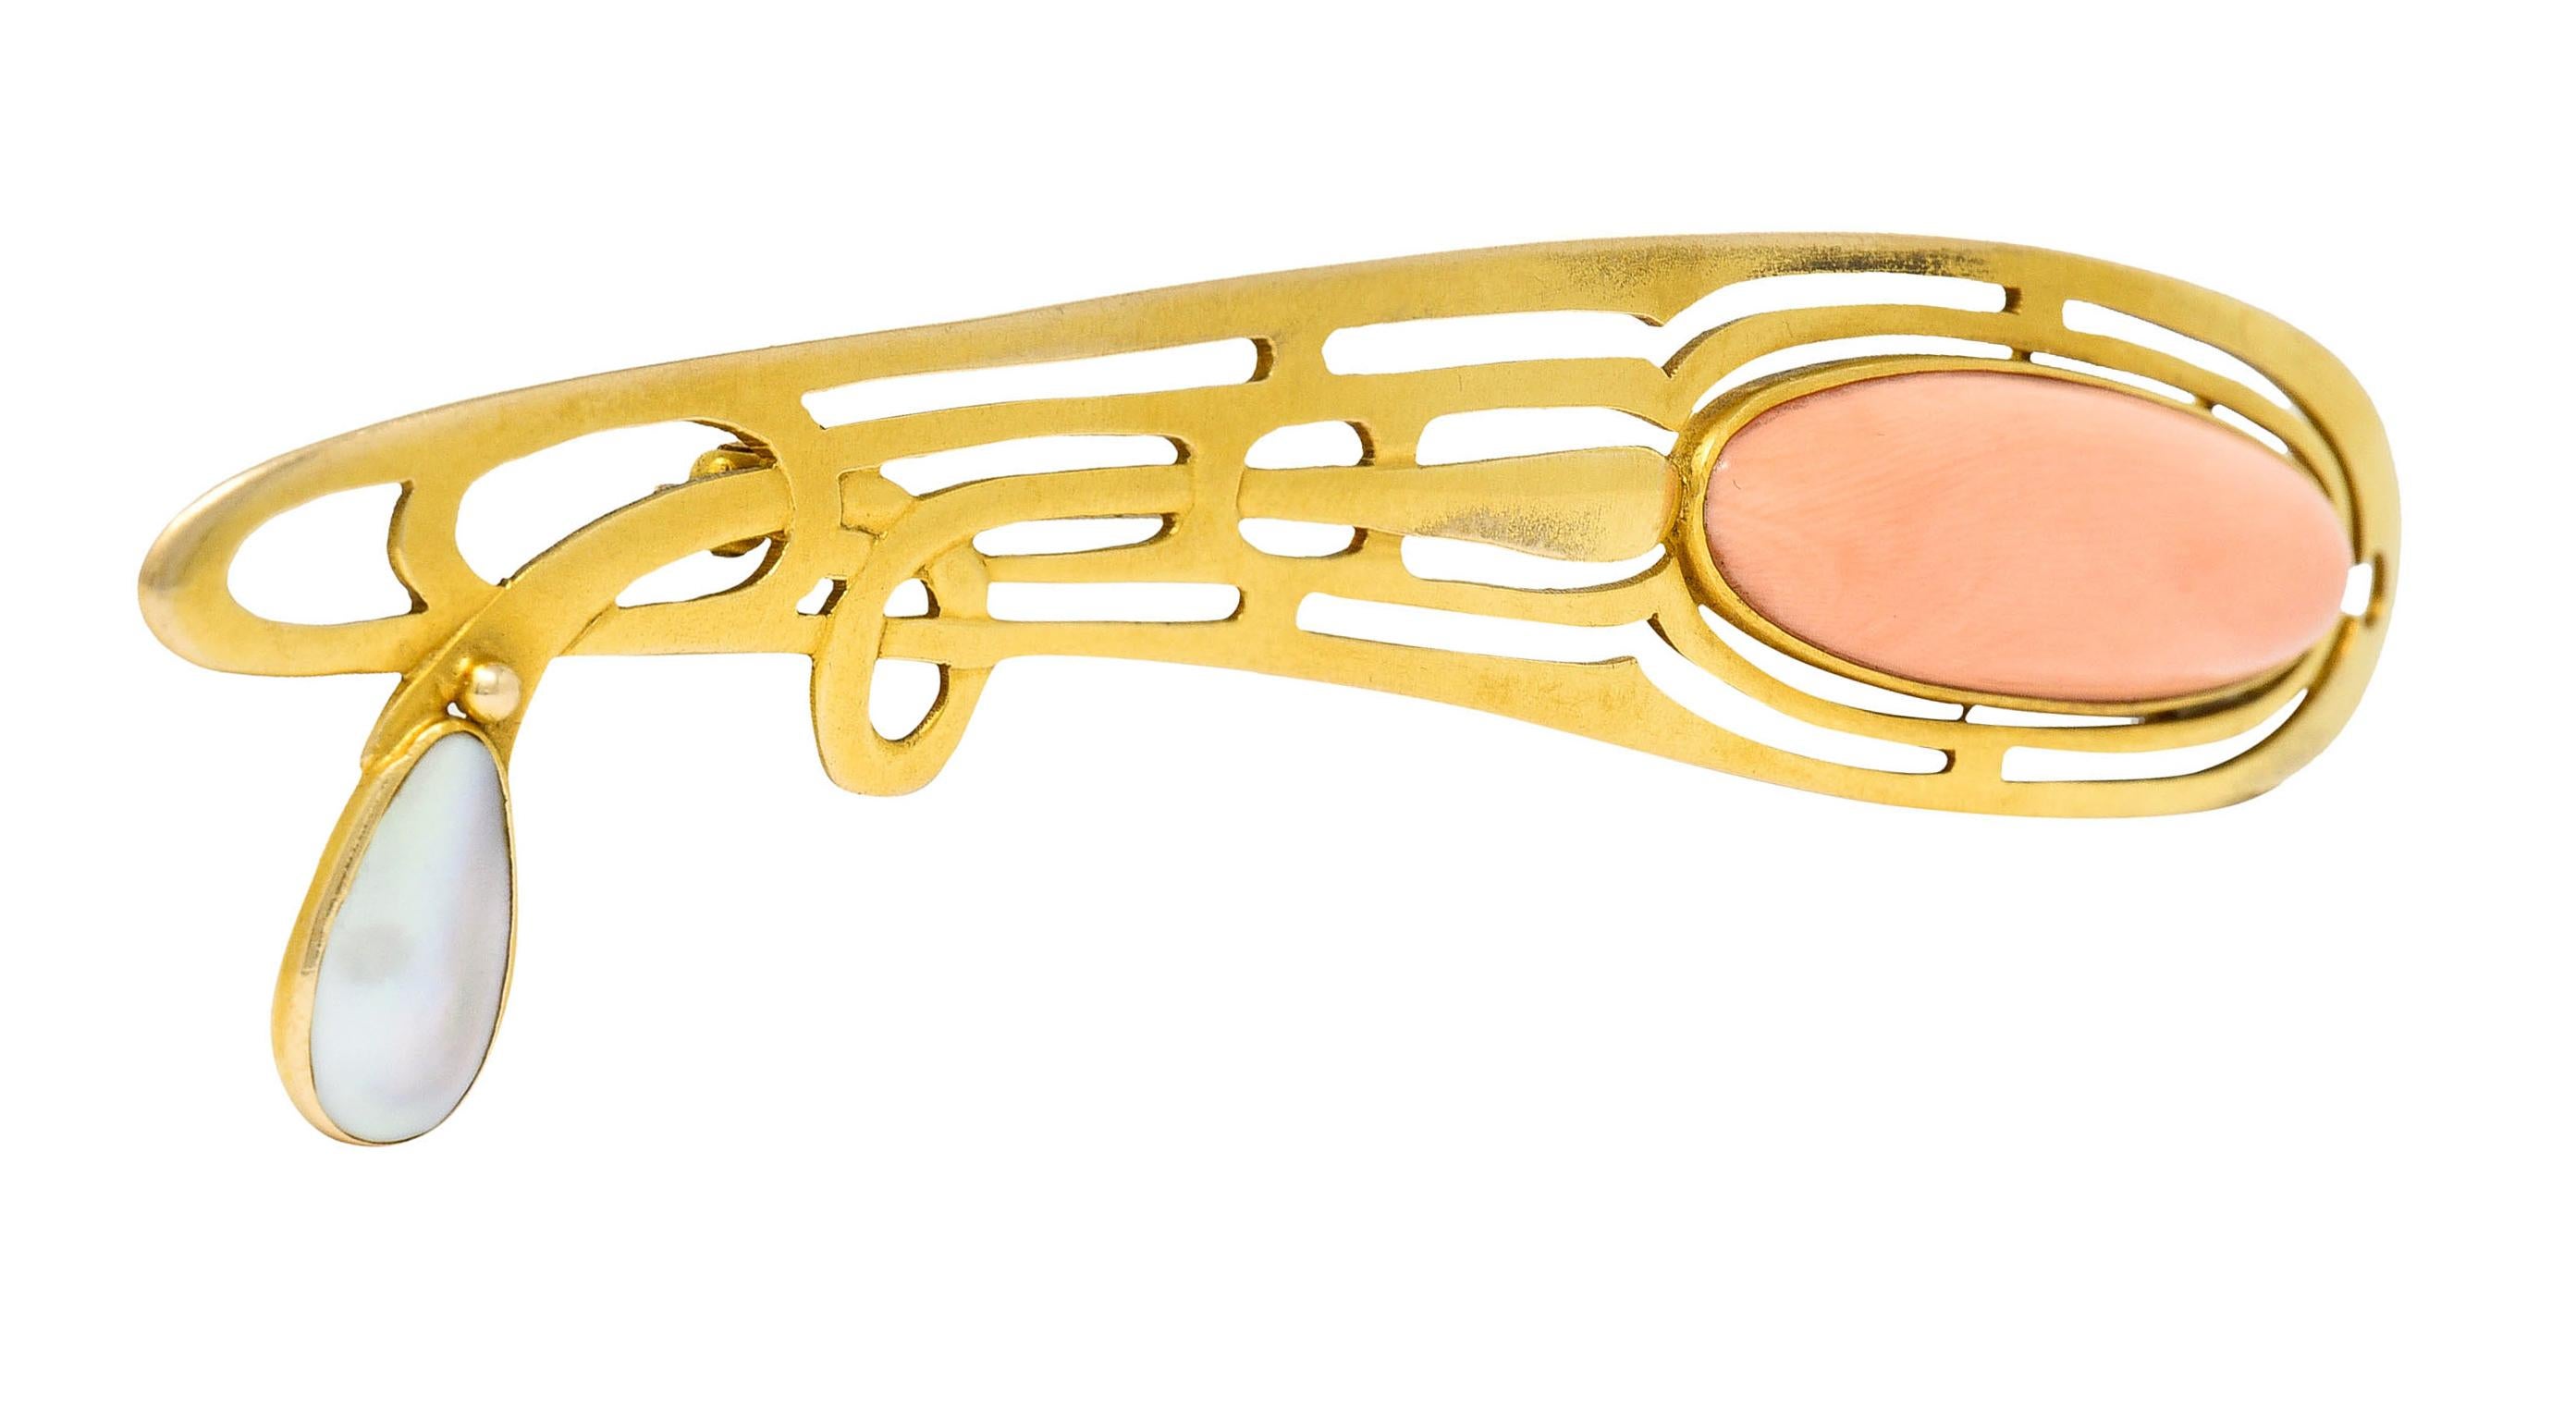 Substantial brooch is a stylized whiplash design

Featuring an elongated oval cabochon of pastel peachy pink coral

Measuring approximately 45.5 x 11.5 mm and exhibits moderately swirling color distribution

With a pear shaped blister pearl - white